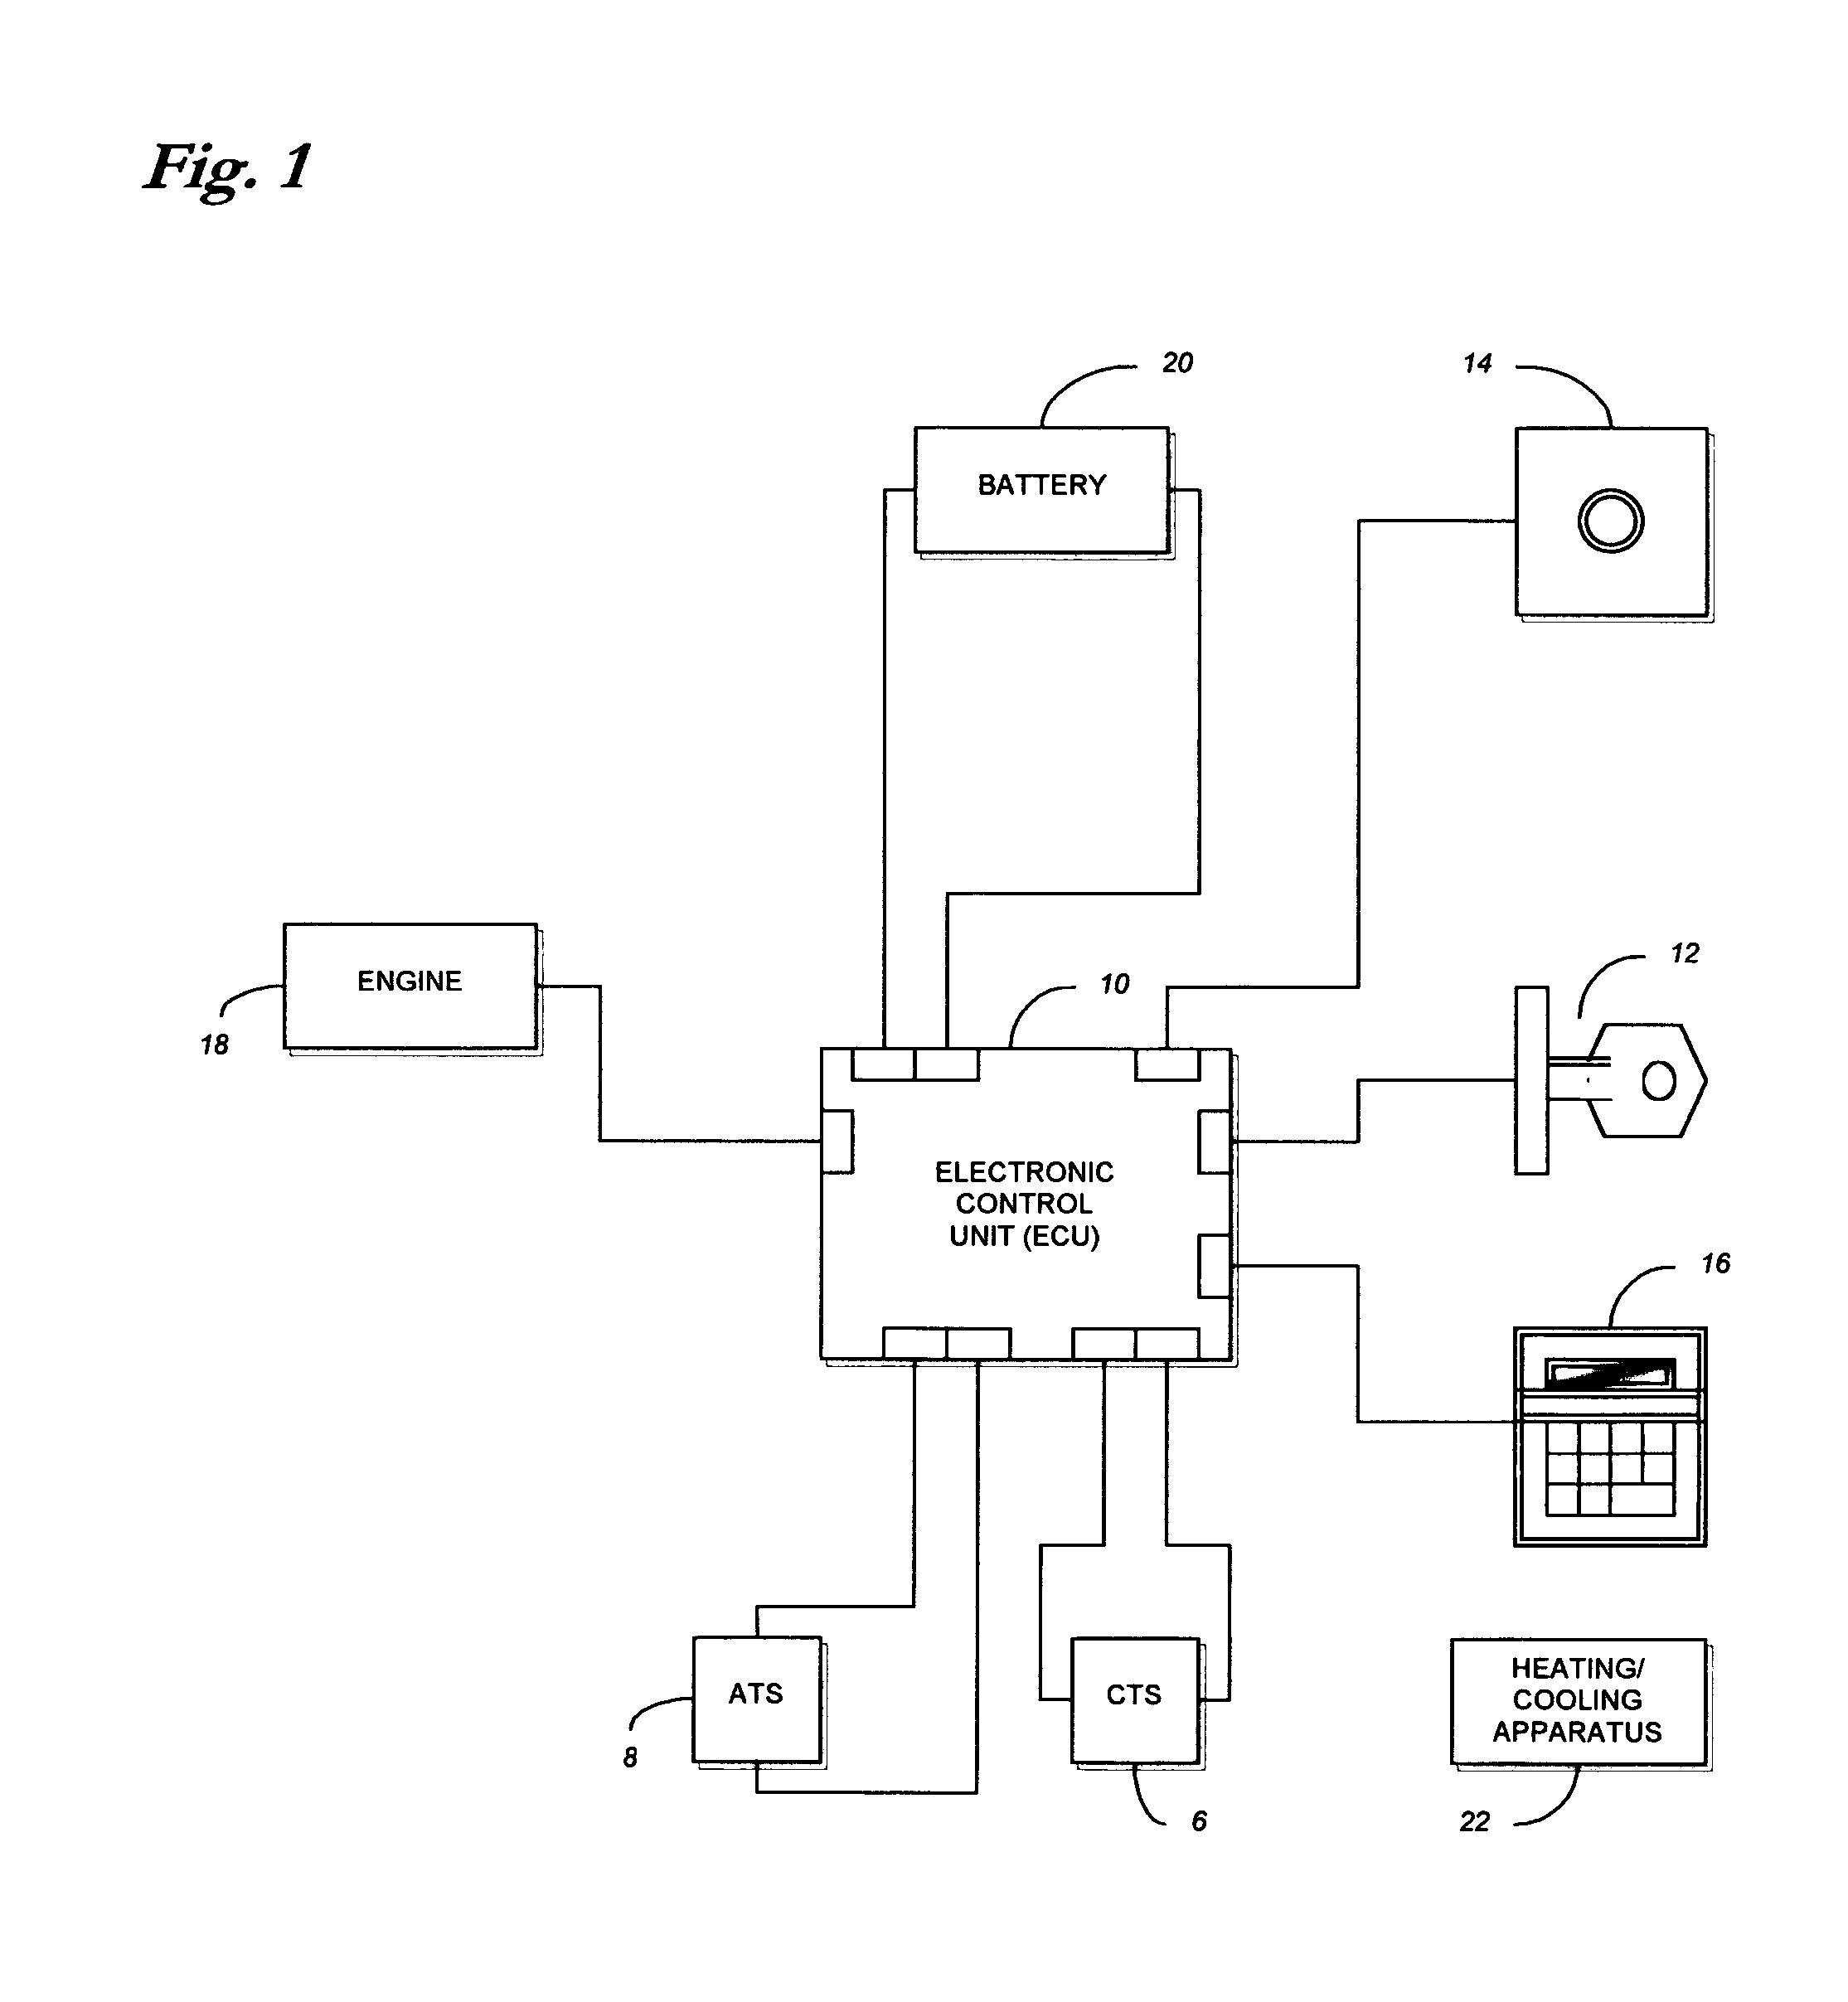 Method and system for controlling an engine to maintain a comfortable cabin temperature within a vehicle